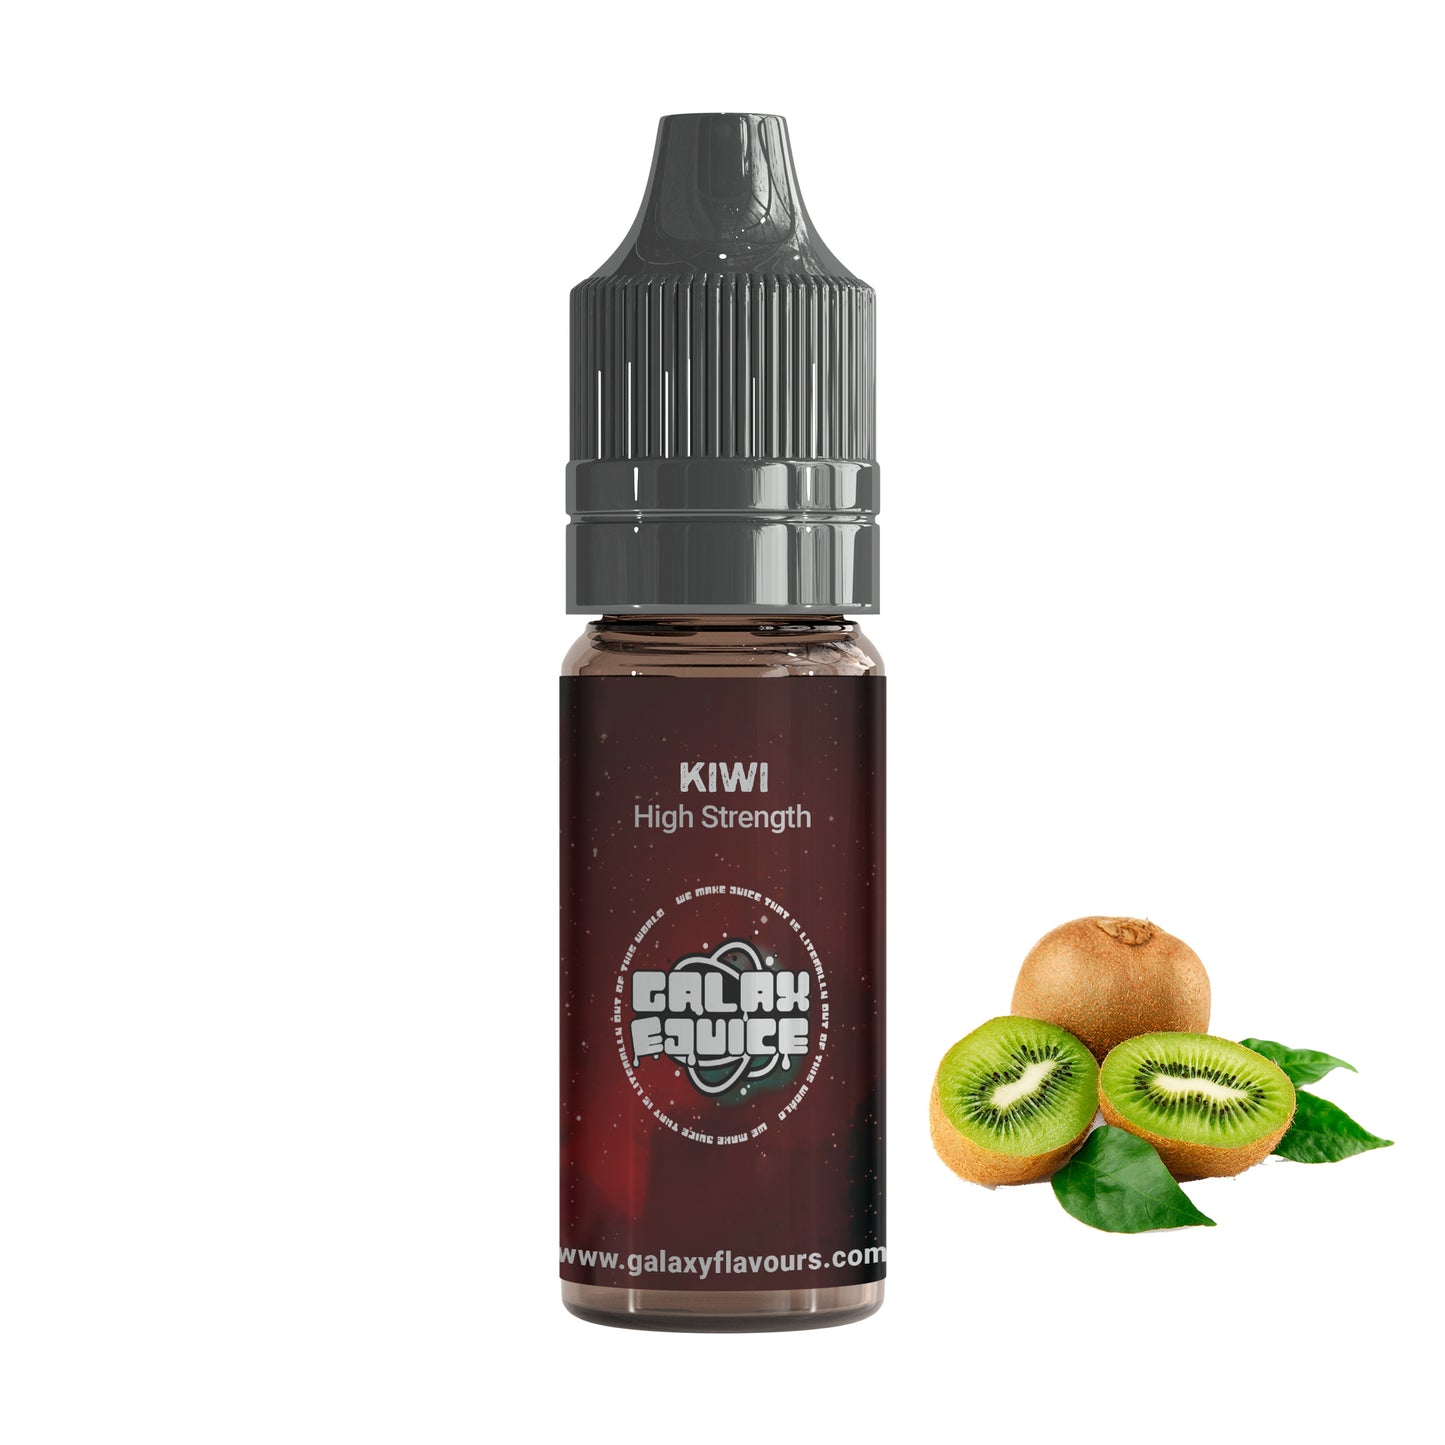 Kiwi High Strength Professional Flavouring.